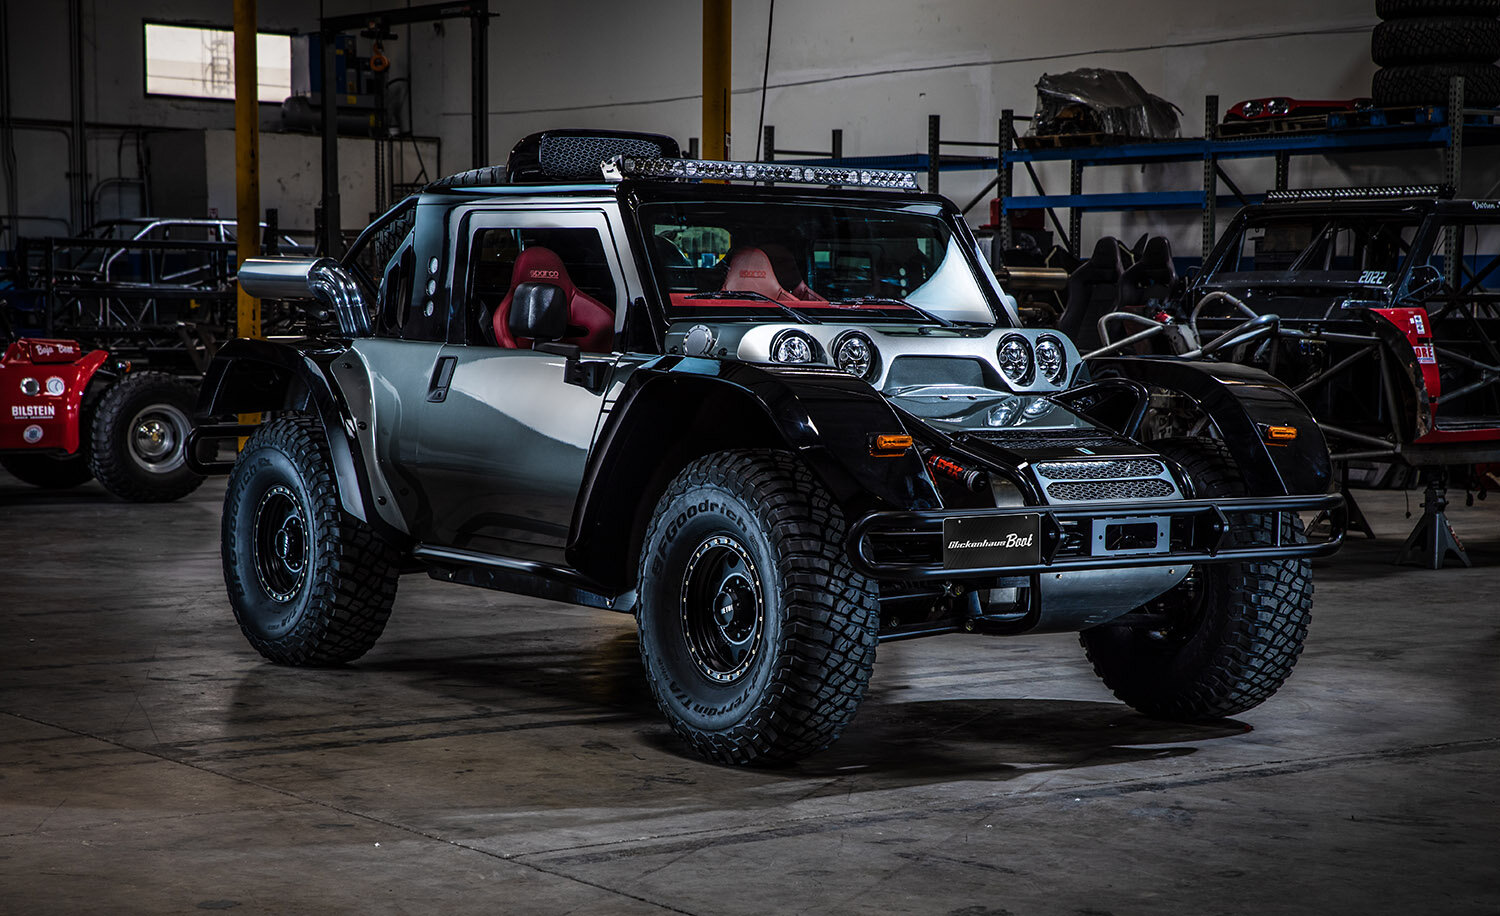 Radical off-roaders: rough, rugged, and entirely bespoke | Wallpaper